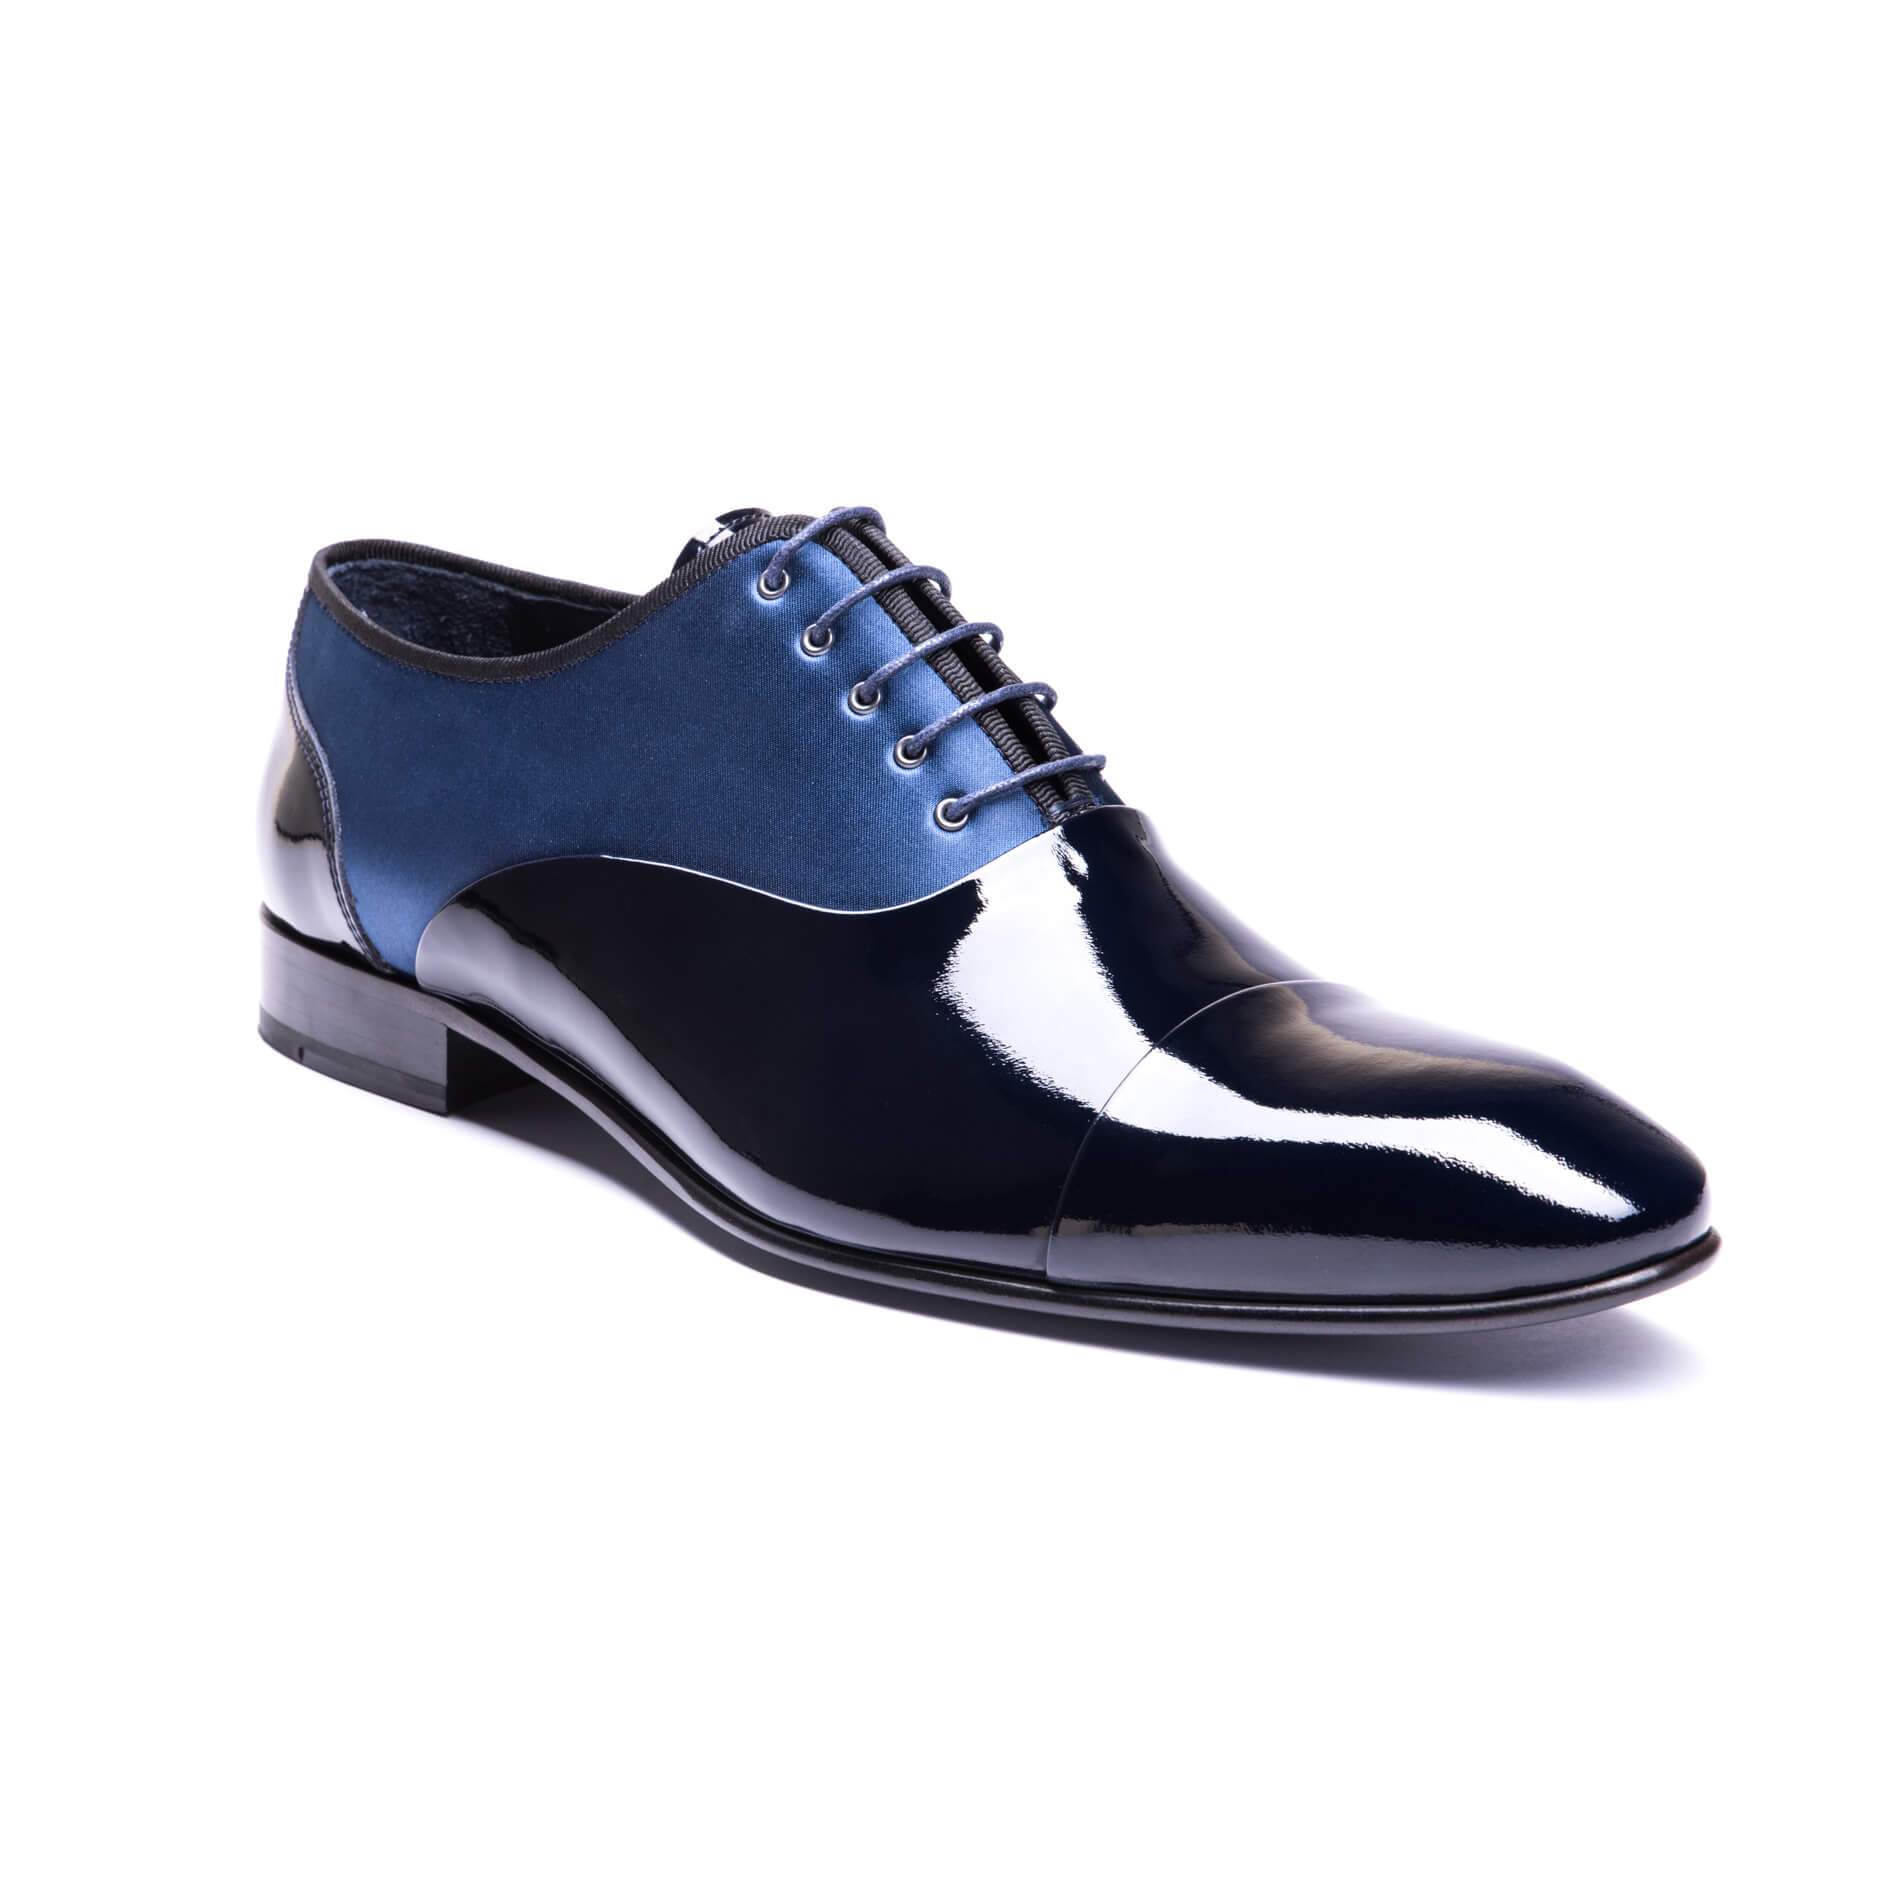 navy blue leather shoes mens